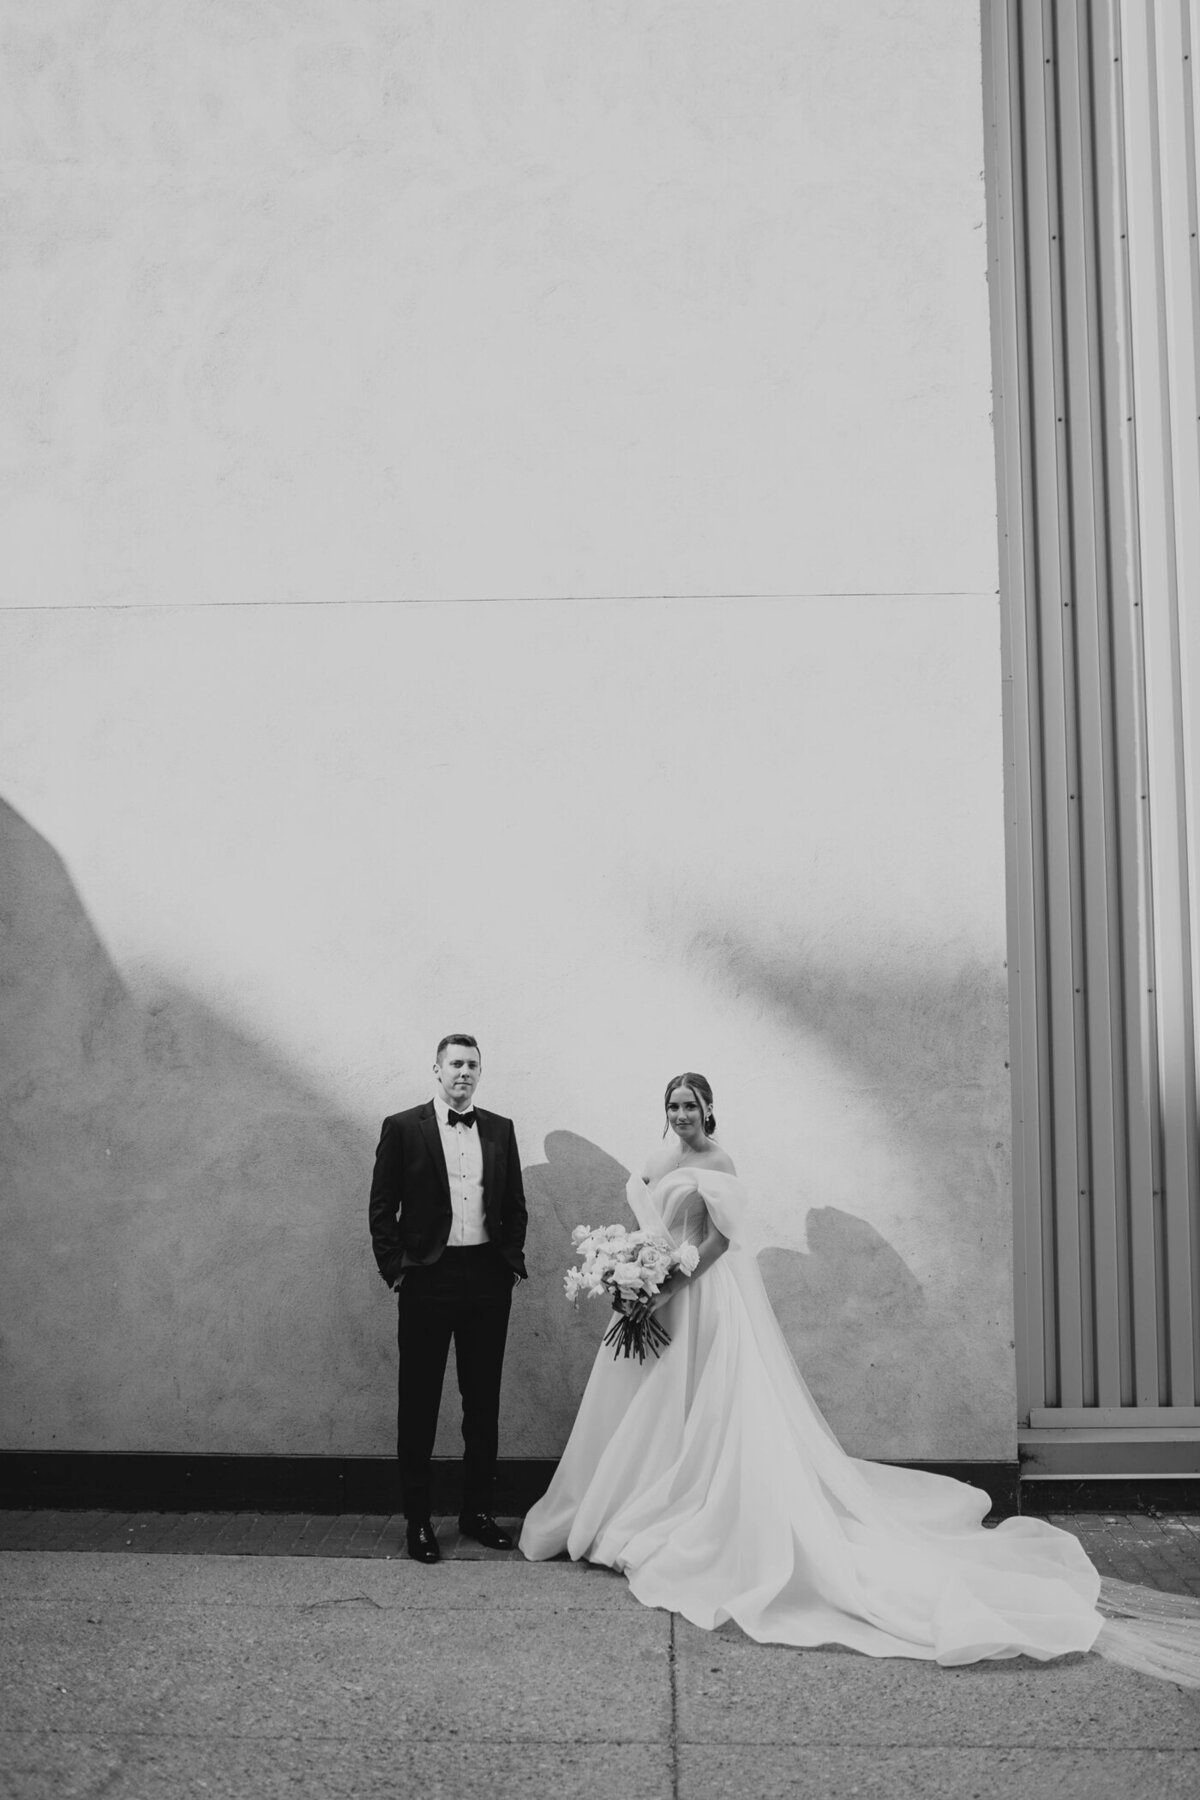 Black and white portrait of a bride and groom.